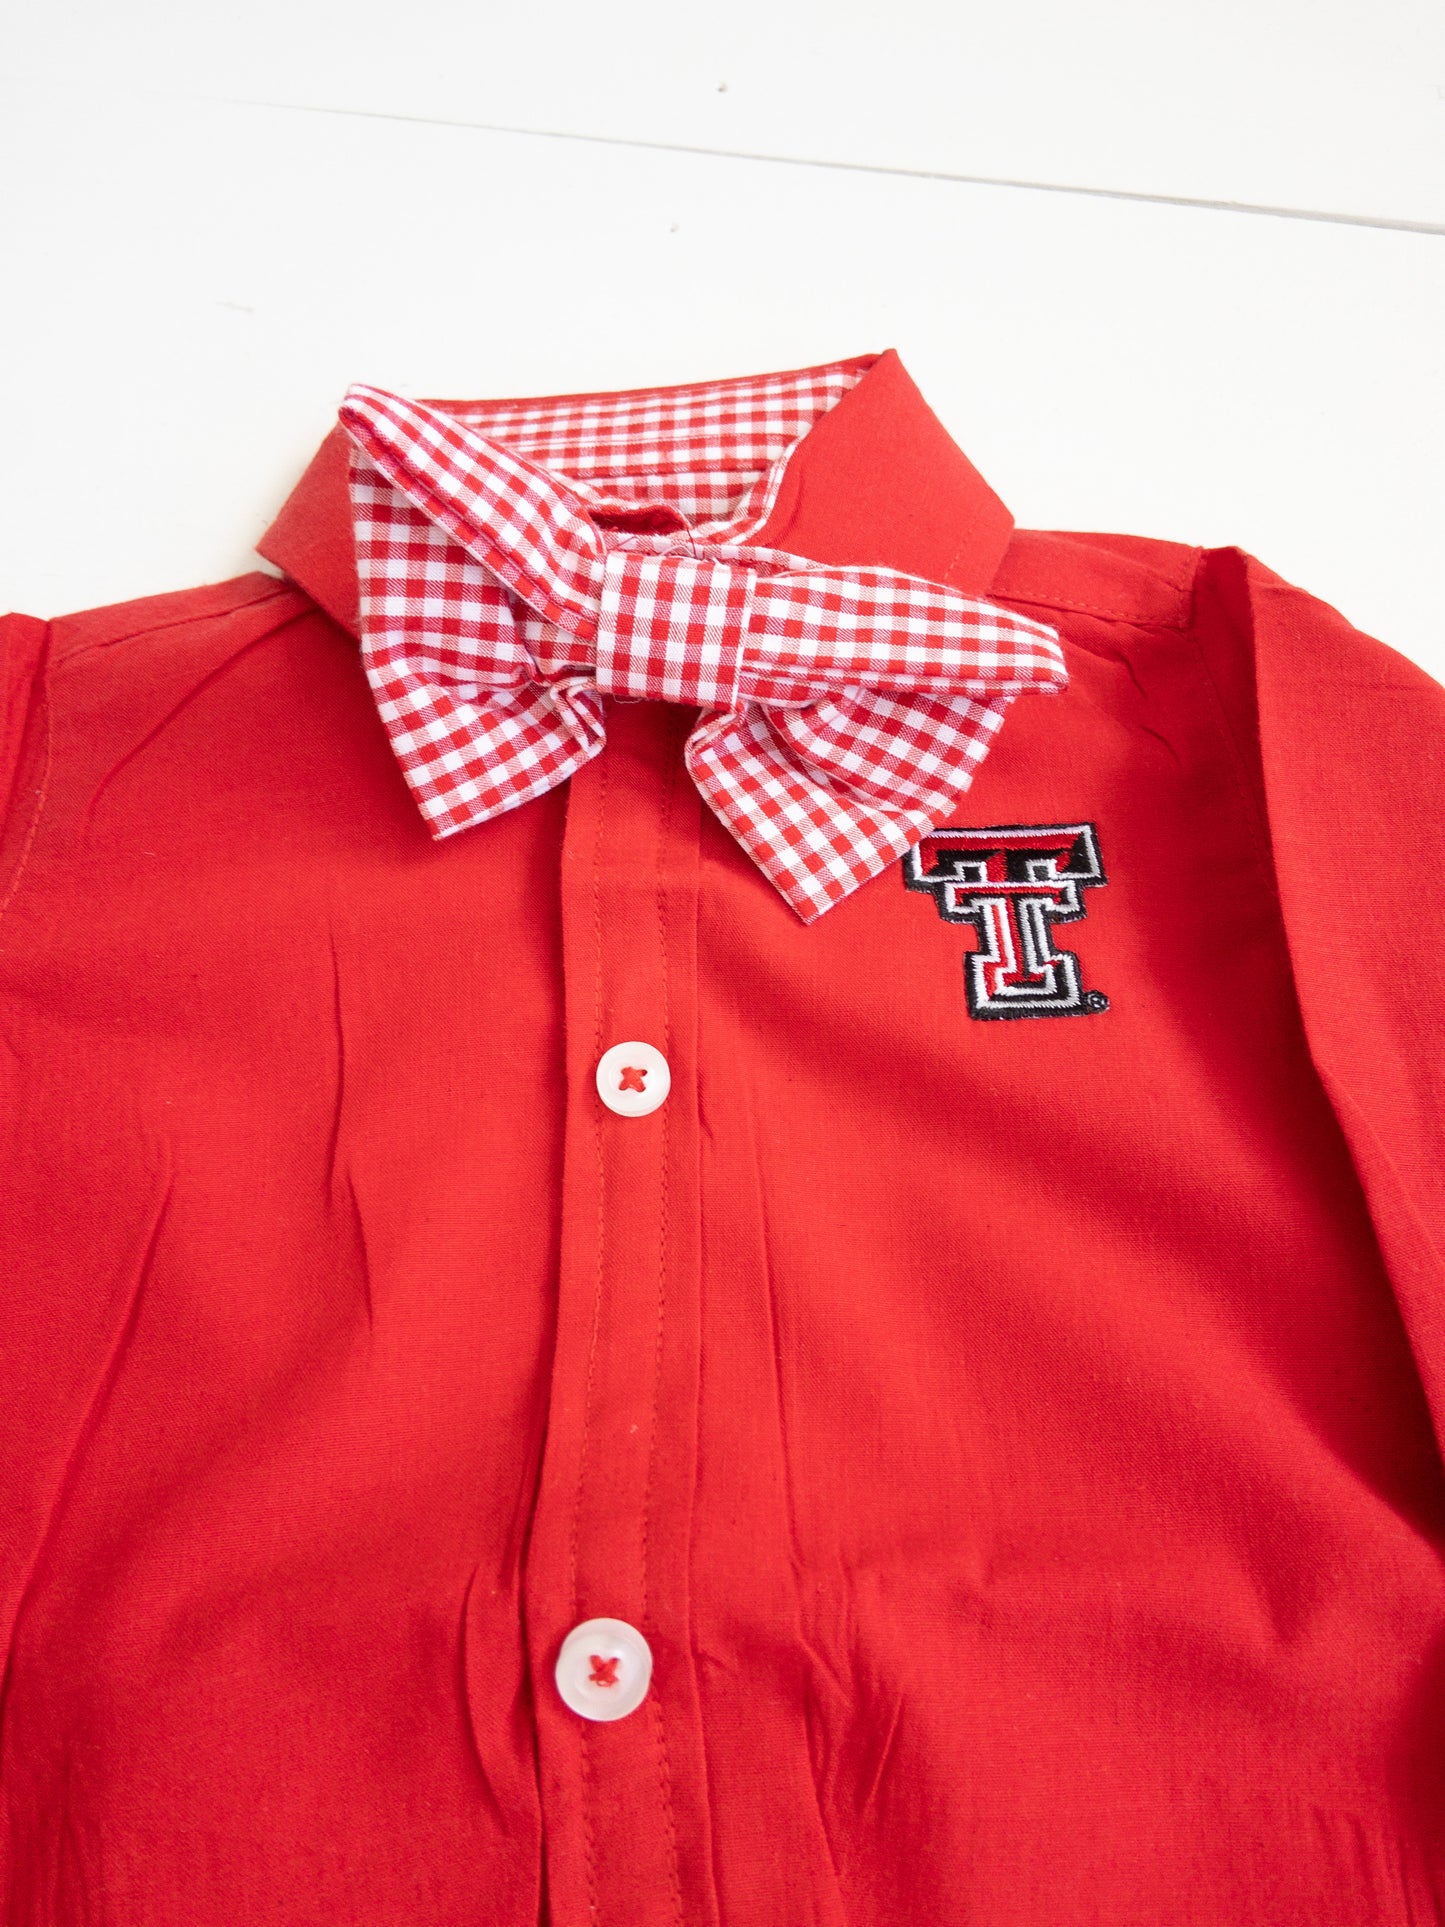 Texas Tech Button Down with Bow Tie